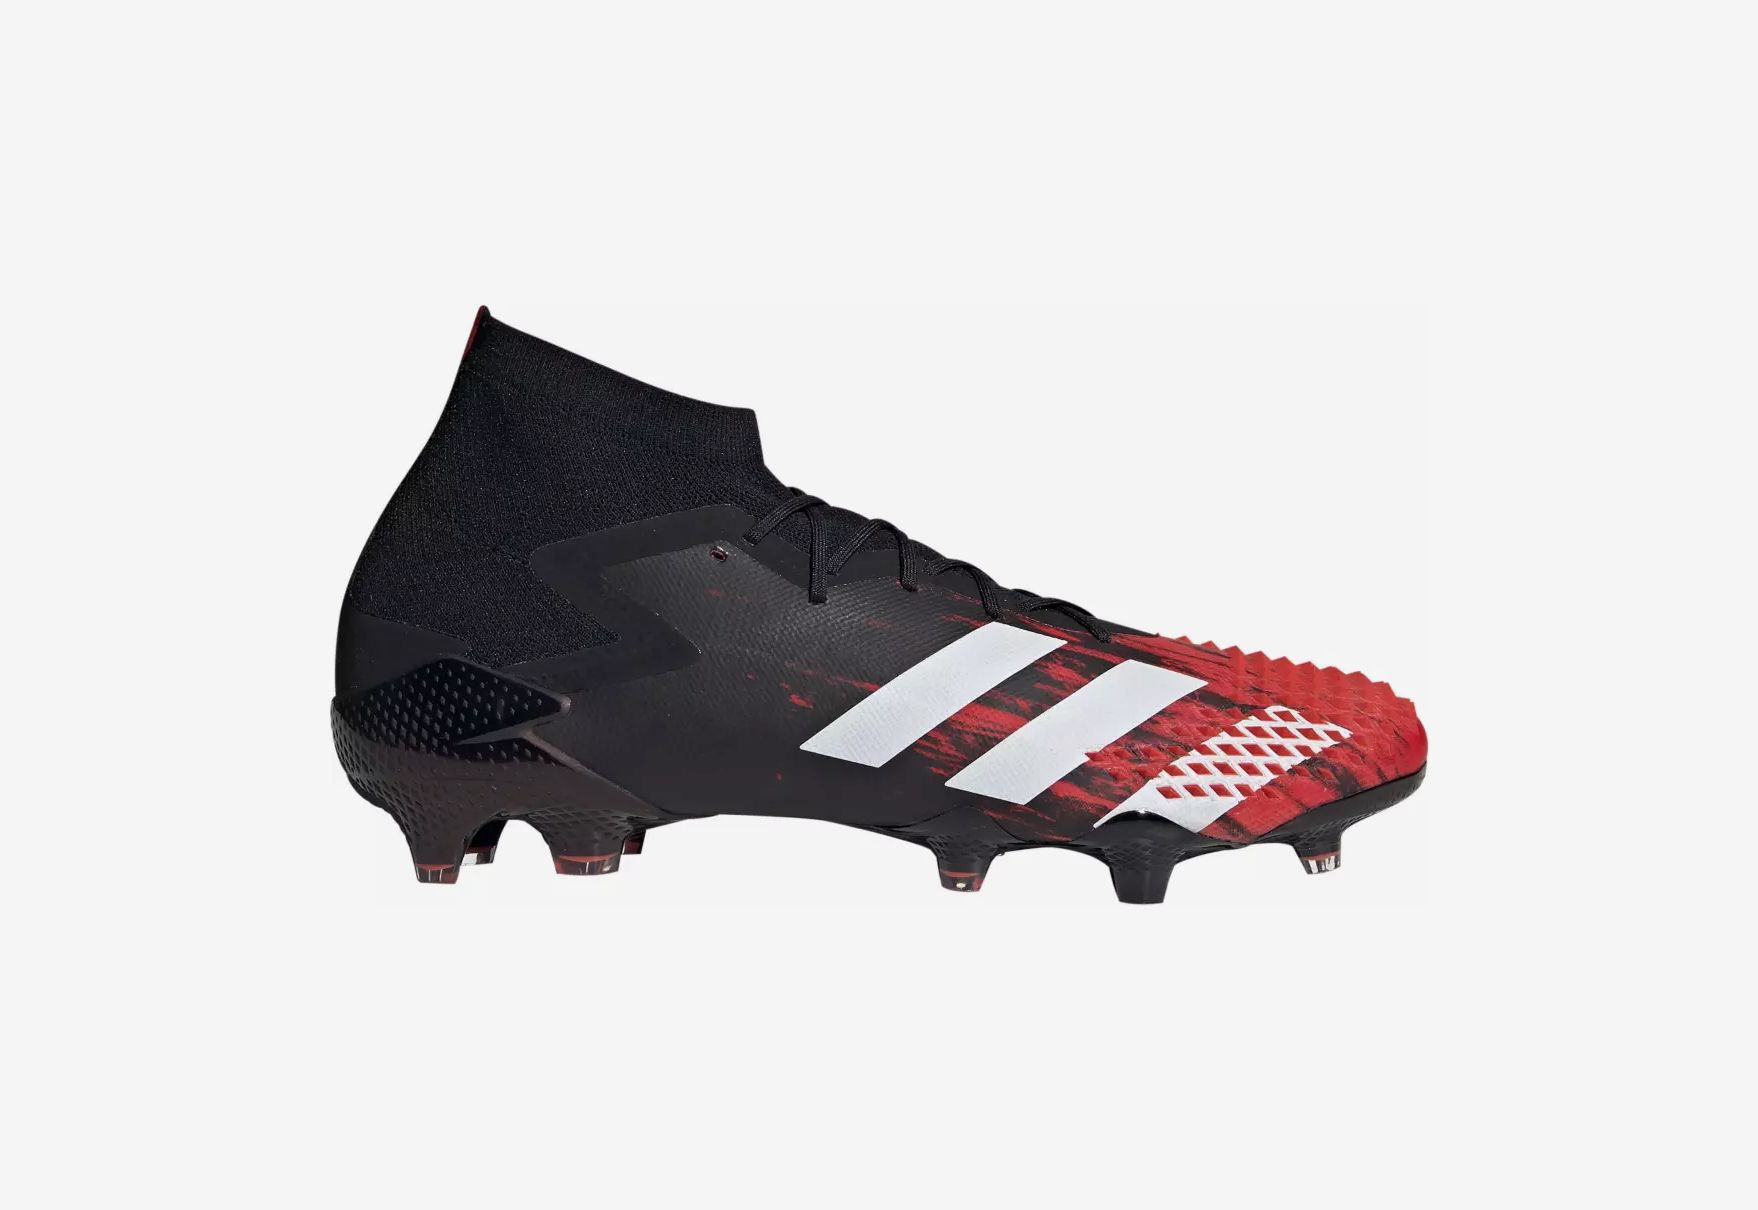 What are the best soccer cleats for wide feet?